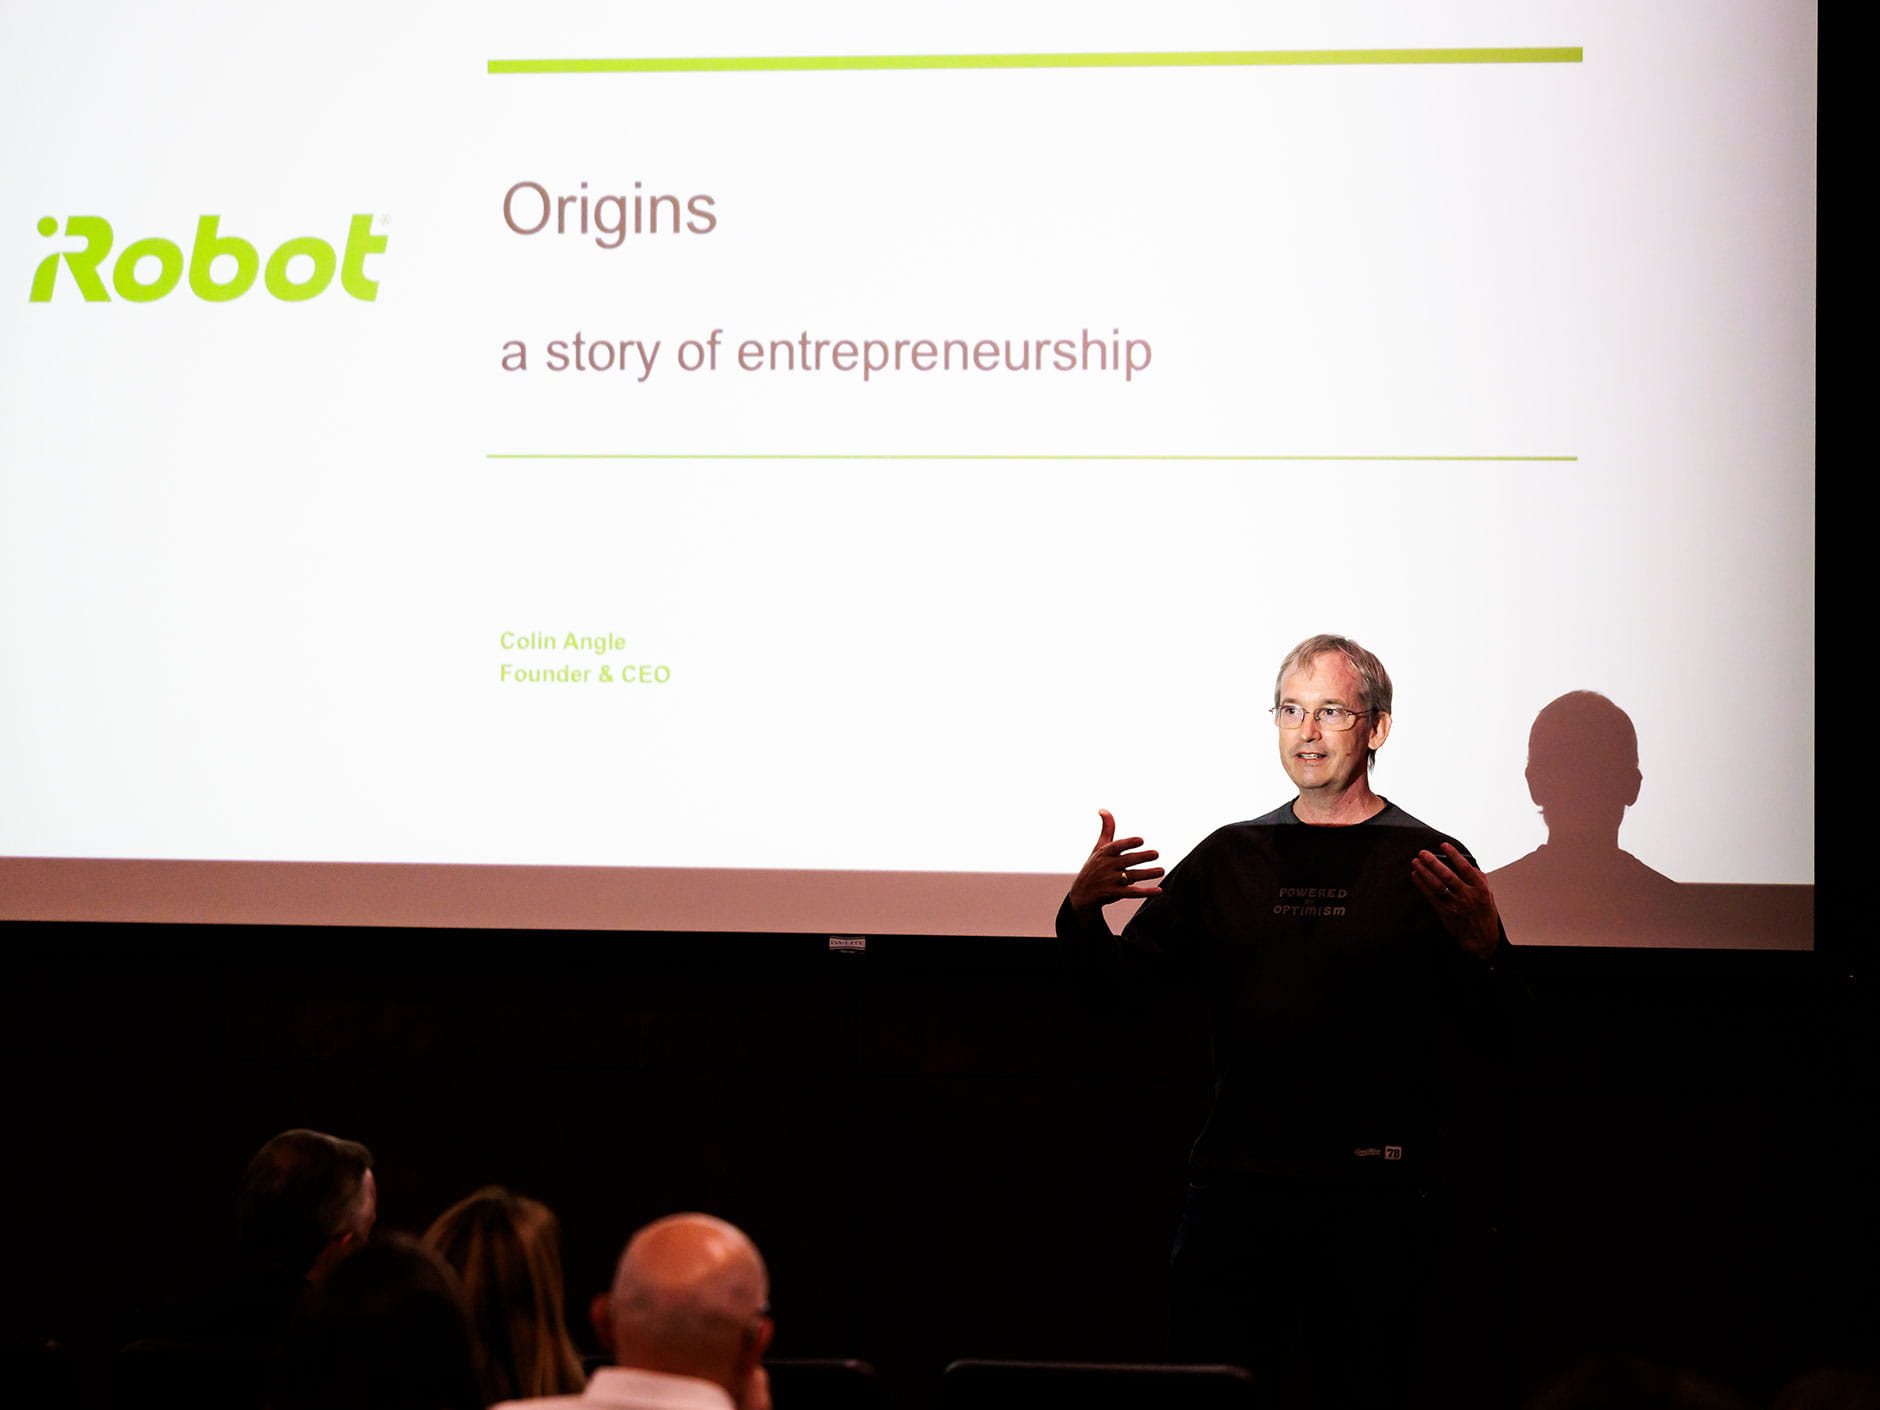 Making robots isn’t all it’s cracked up to be, and in a talk at Endicott College’s Colin and Erika Angle Center for Entrepreneurship, iRobot Founder and CEO Colin Angle shared his entrepreneurship story of ups and downs—and the Roomba. 